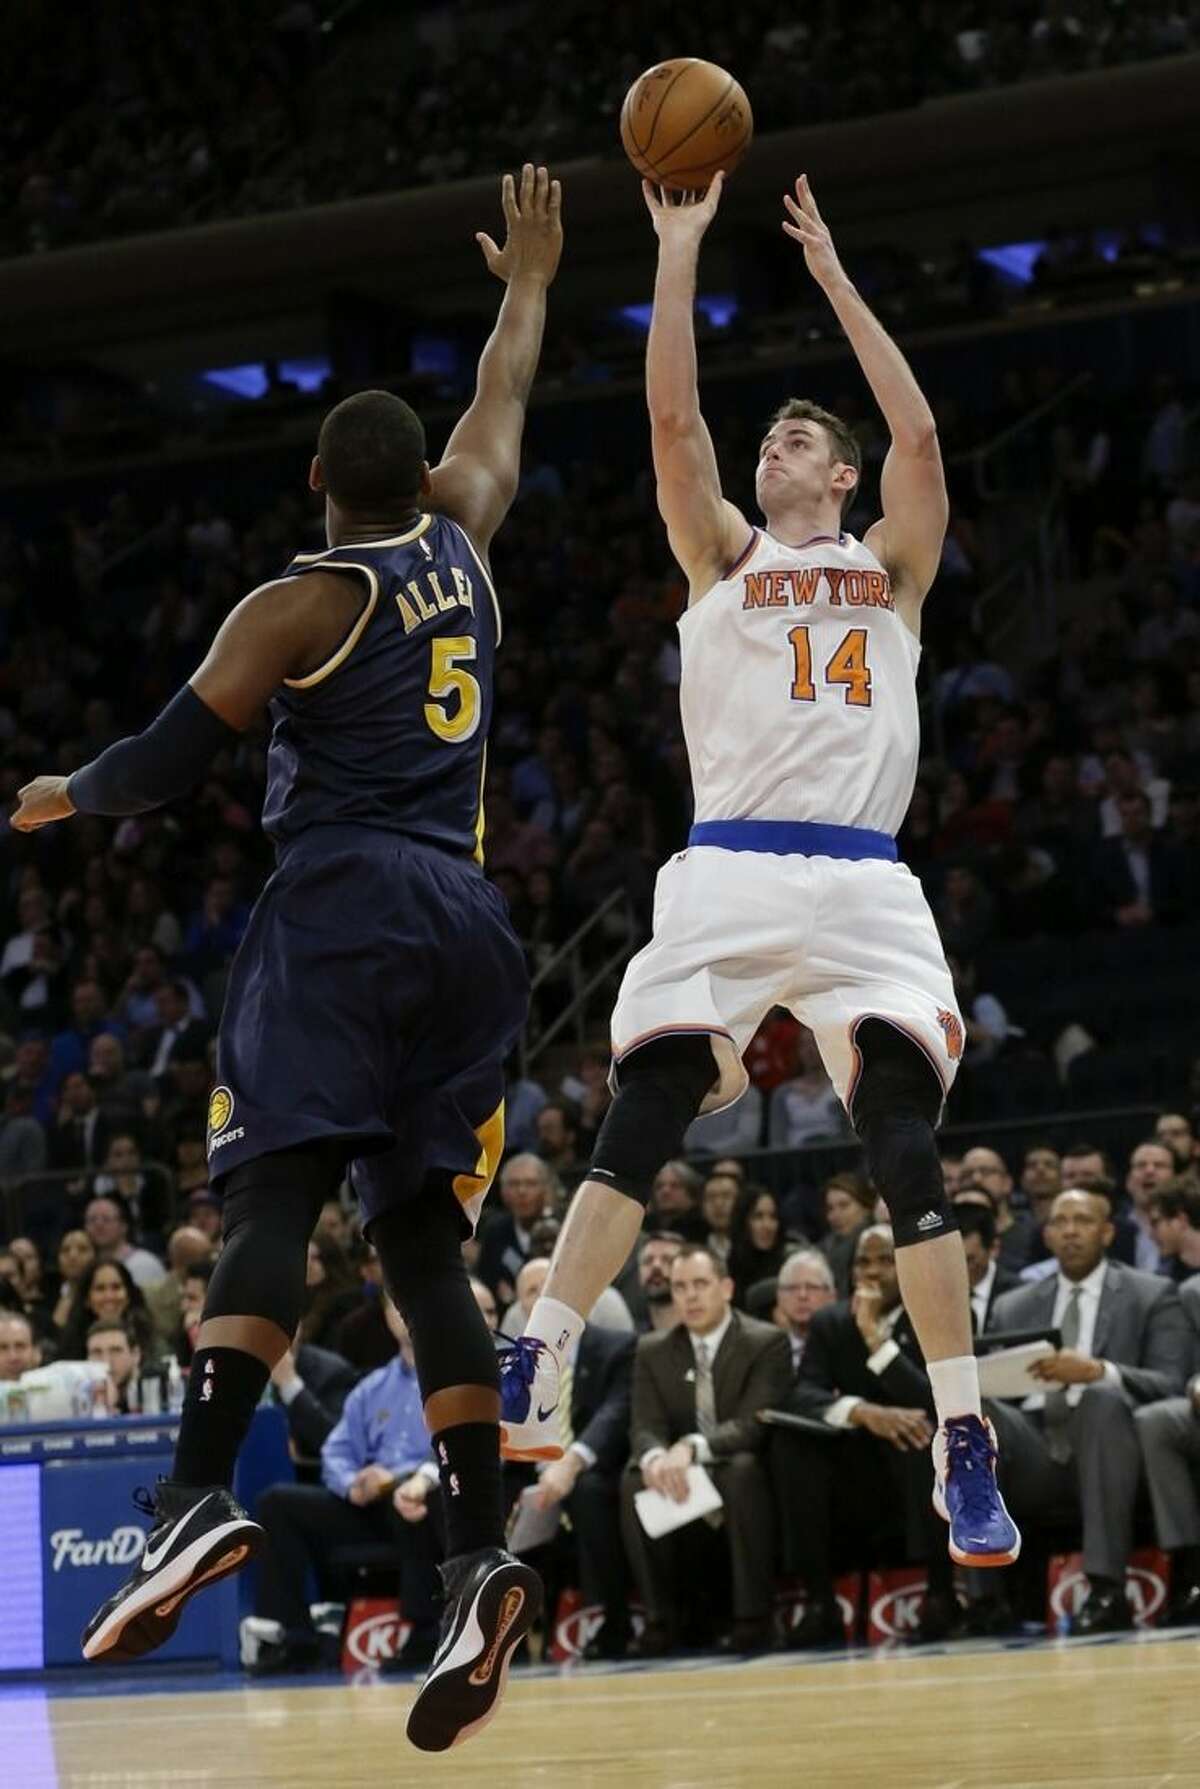 New York Knicks' Jason Smith (14) shoots over Indiana Pacers' Lavoy Allen (5) during the first half of an NBA basketball game Wednesday, April 8, 2015, in New York. (AP Photo/Frank Franklin II)